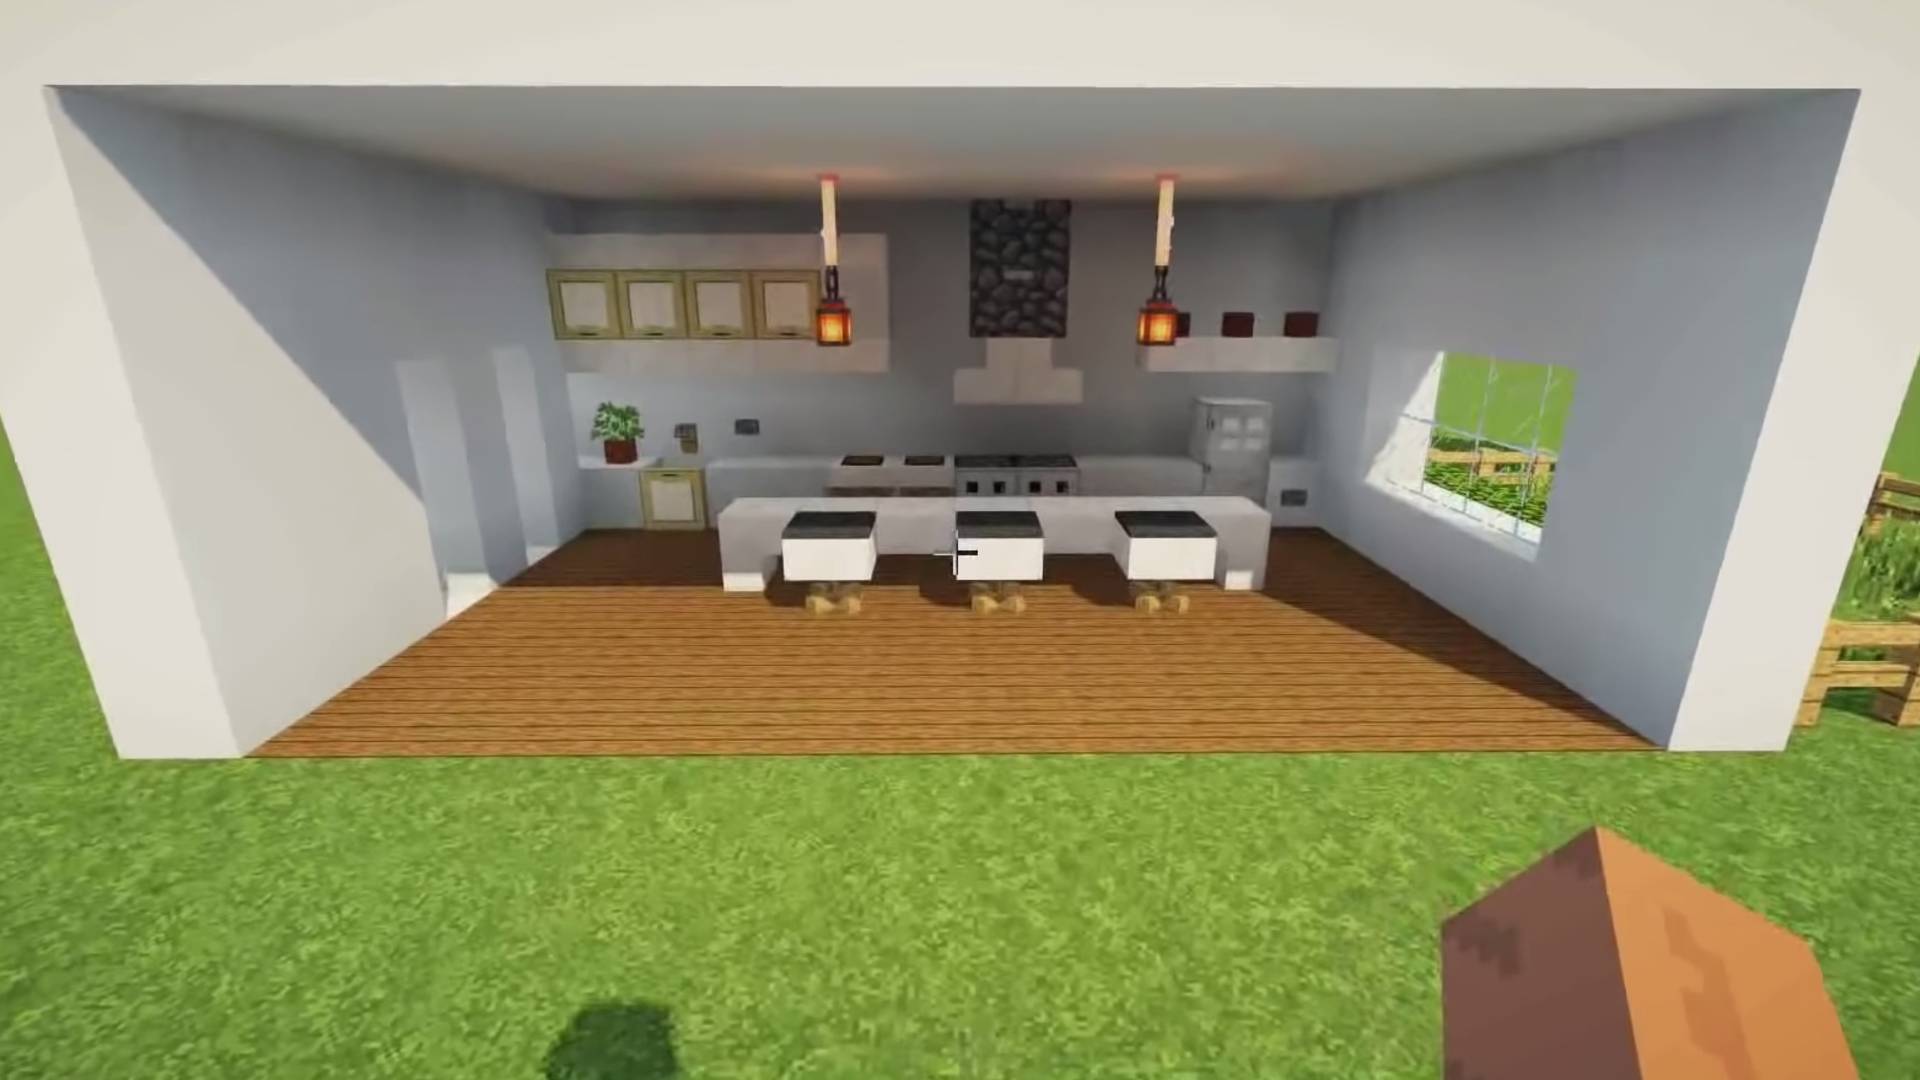 The best Minecraft kitchen ideas to give your builds some pizzazz